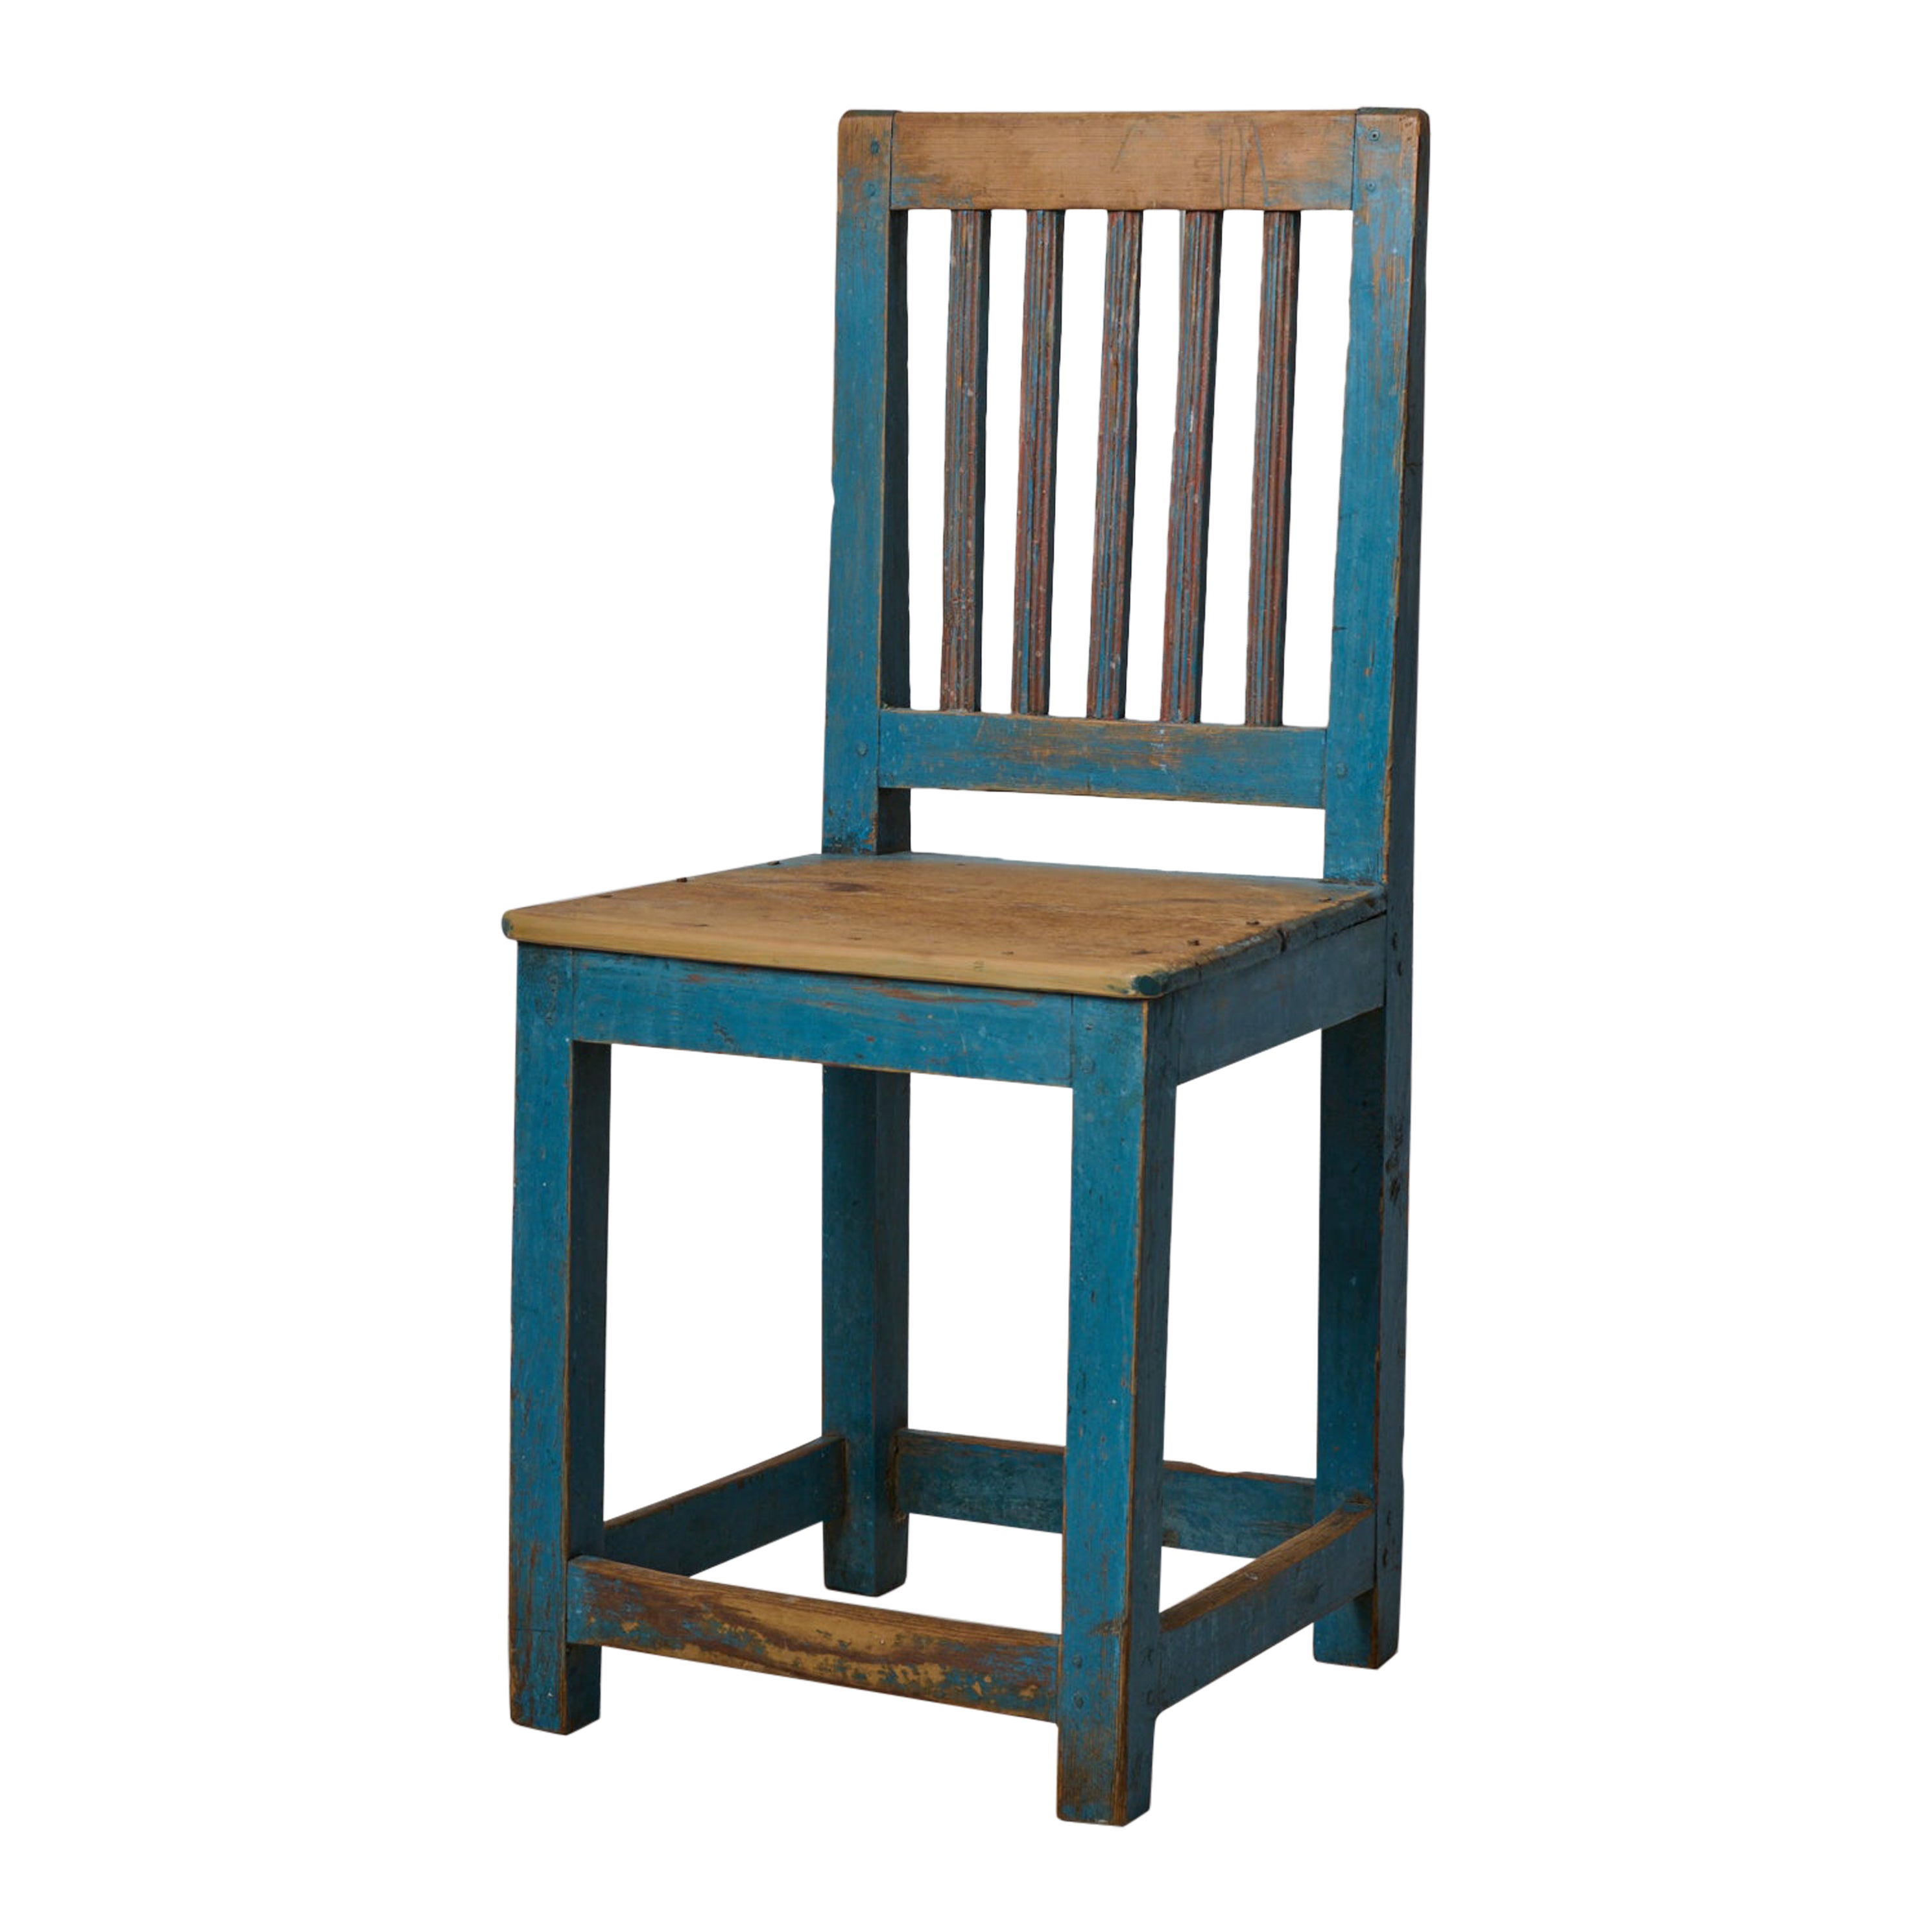 Genuine Northern Swedish Charming Antique Blue Authentic Country Chair For Sale